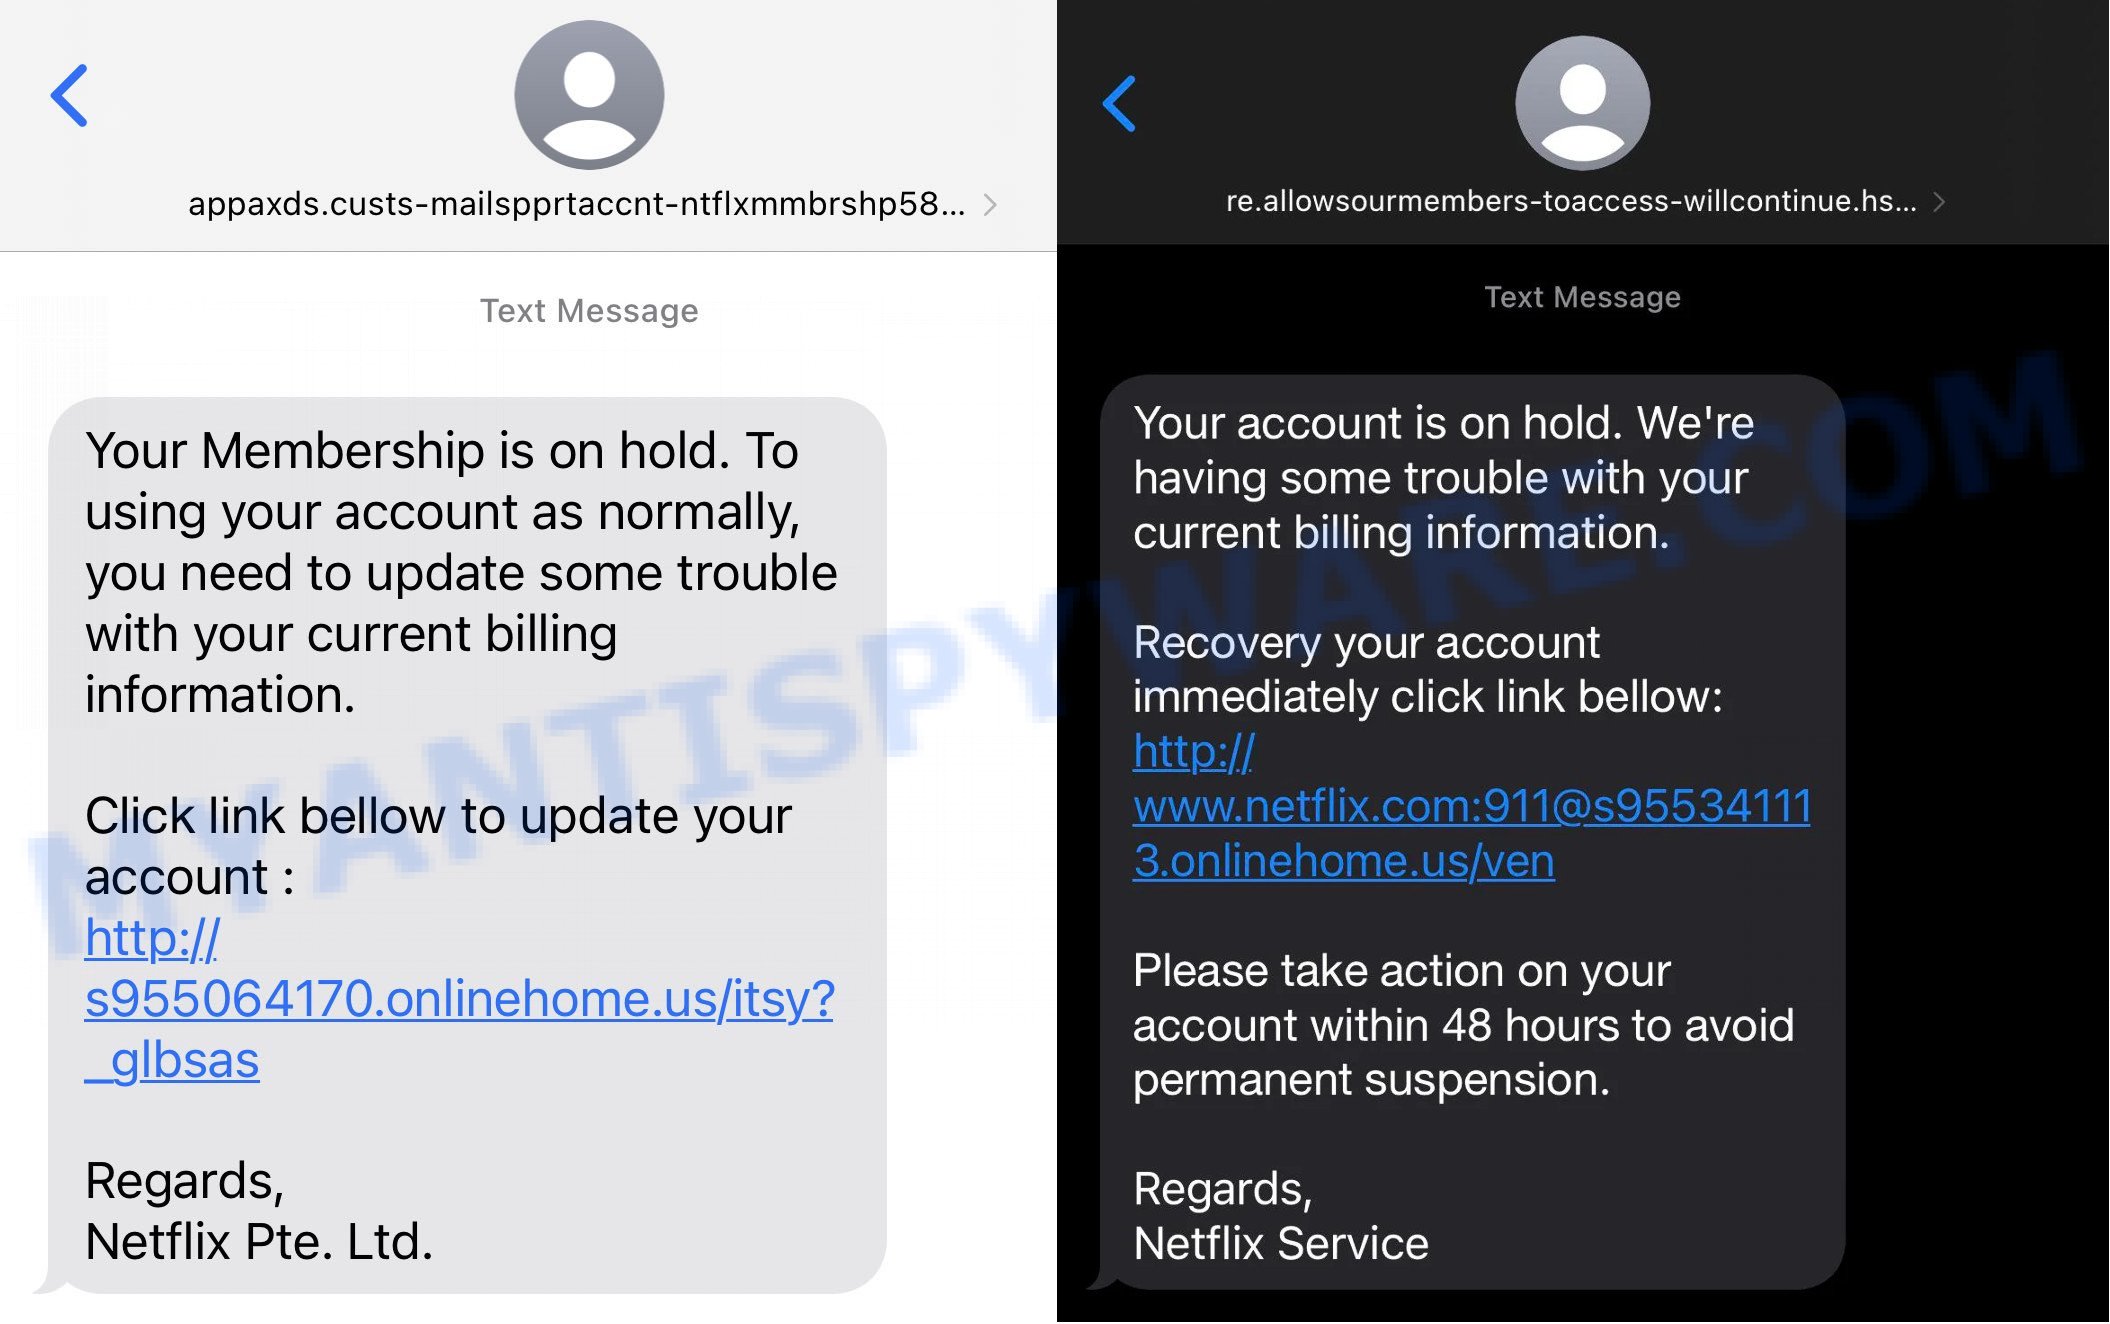 Netflix Membership Account on Hold Scam Text